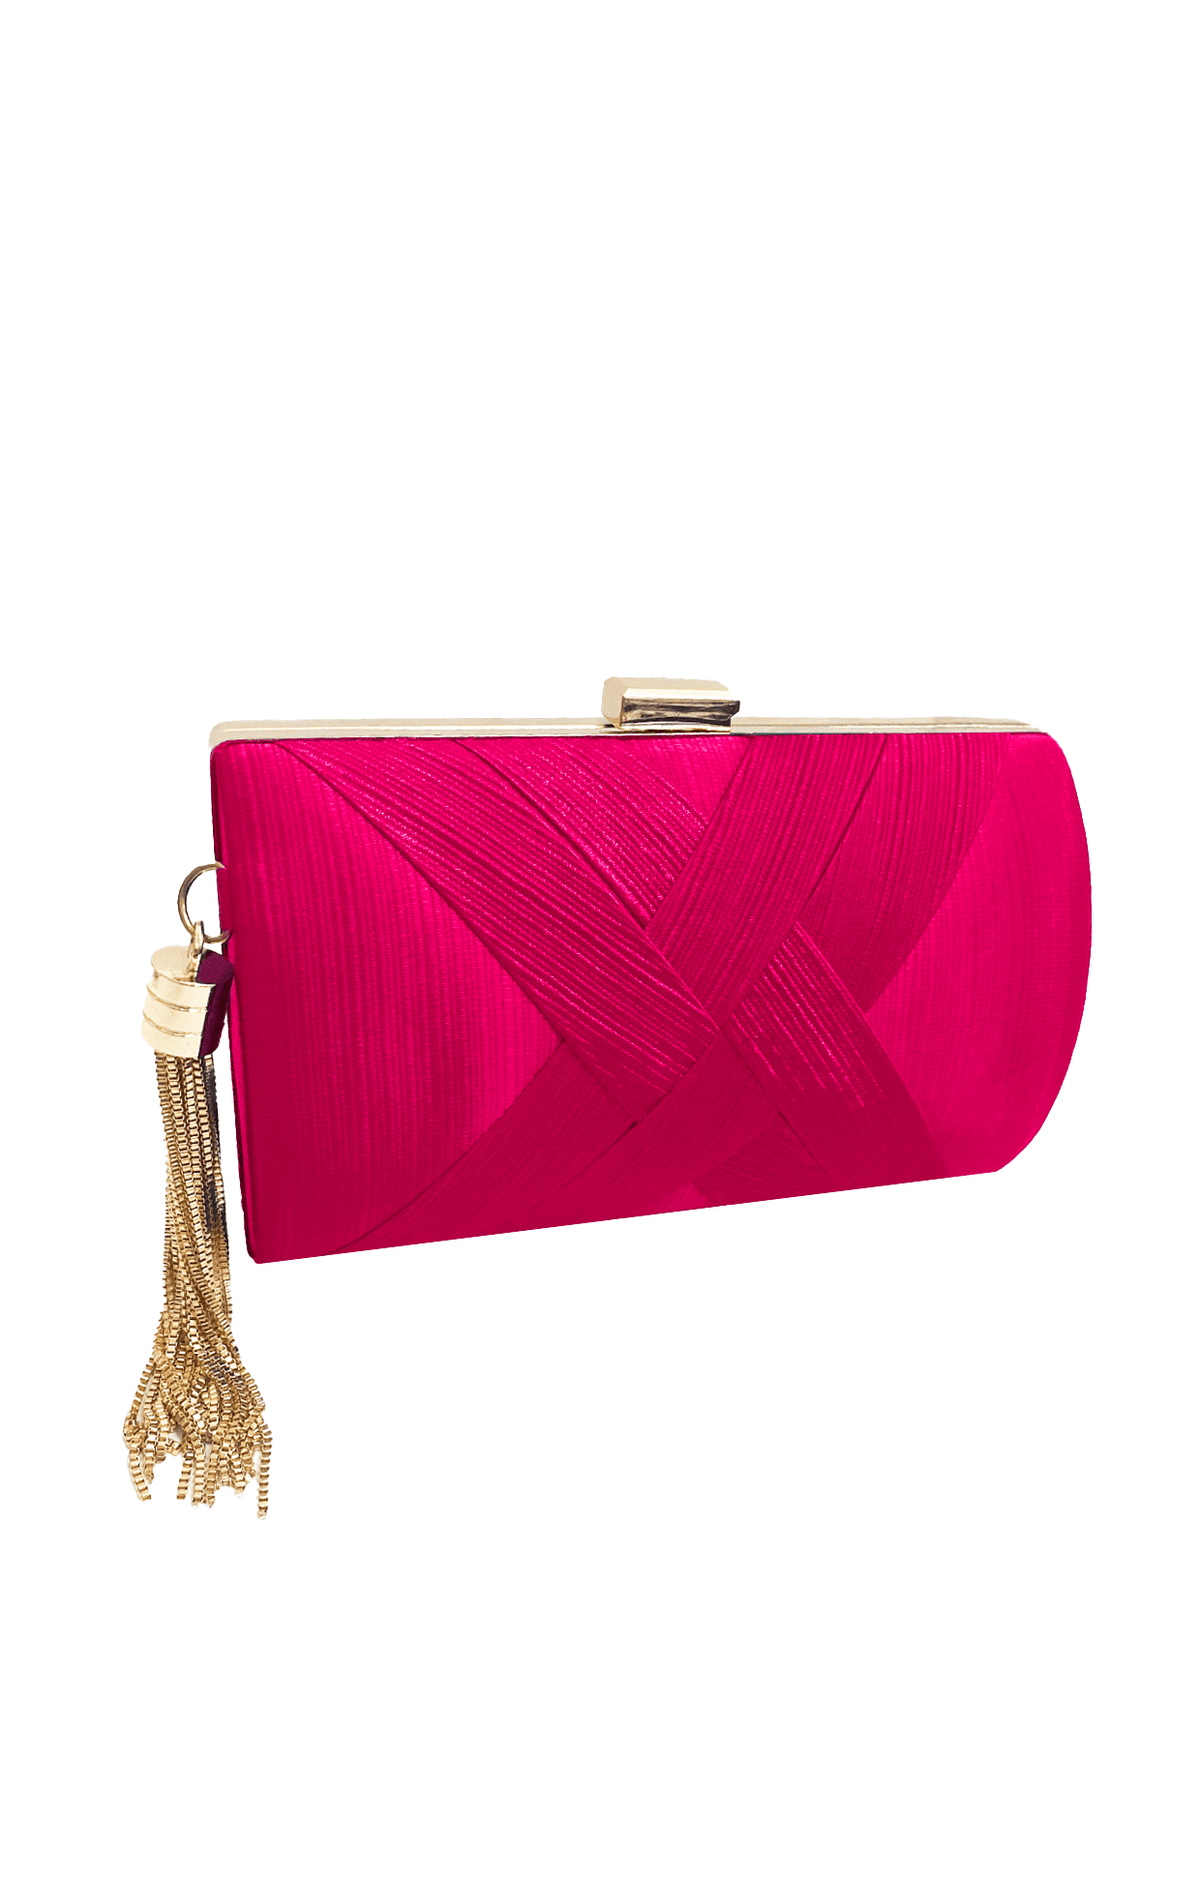 Bags OS / HIBISCUS PINK DEANNA EVENING BAG IN HIBISCUS PINK